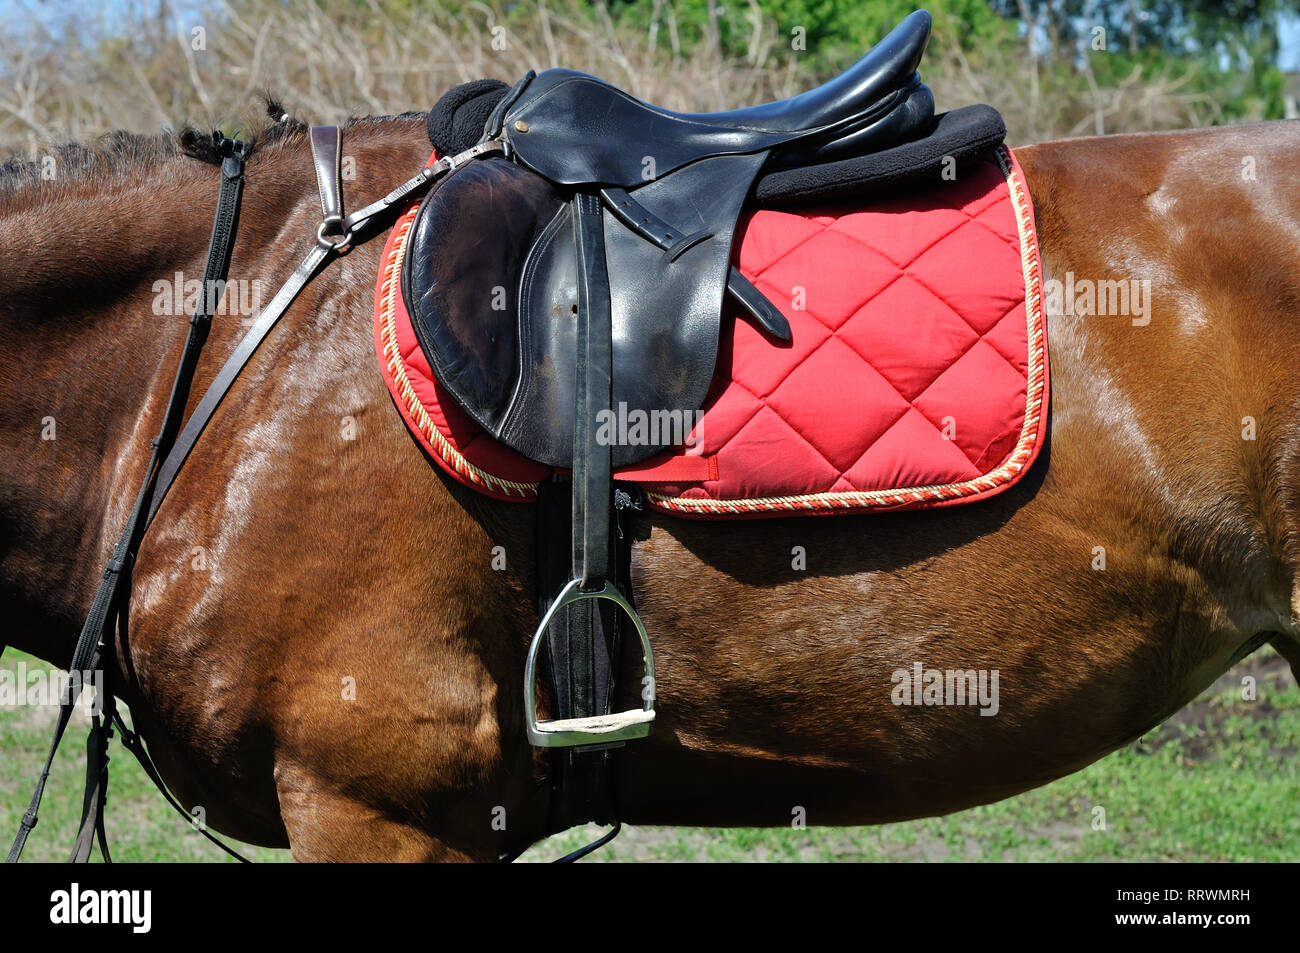 close up of a horse harness, side view Stock Photo